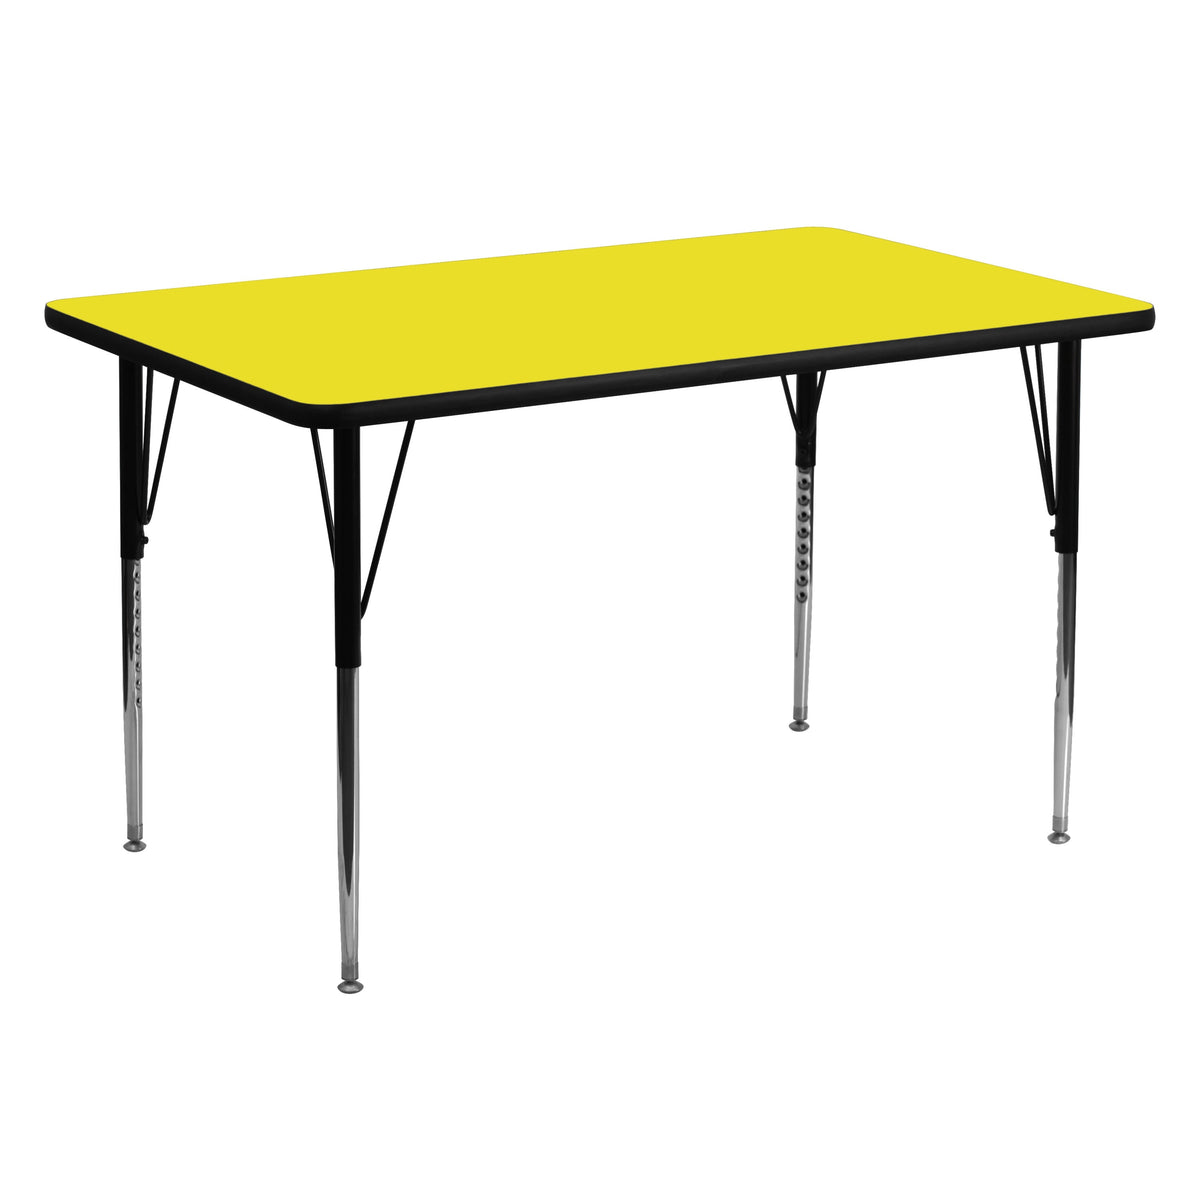 Yellow |#| 30inchW x 60inchL REC Yellow HP Laminate Activity Table - Height Adjustable Legs